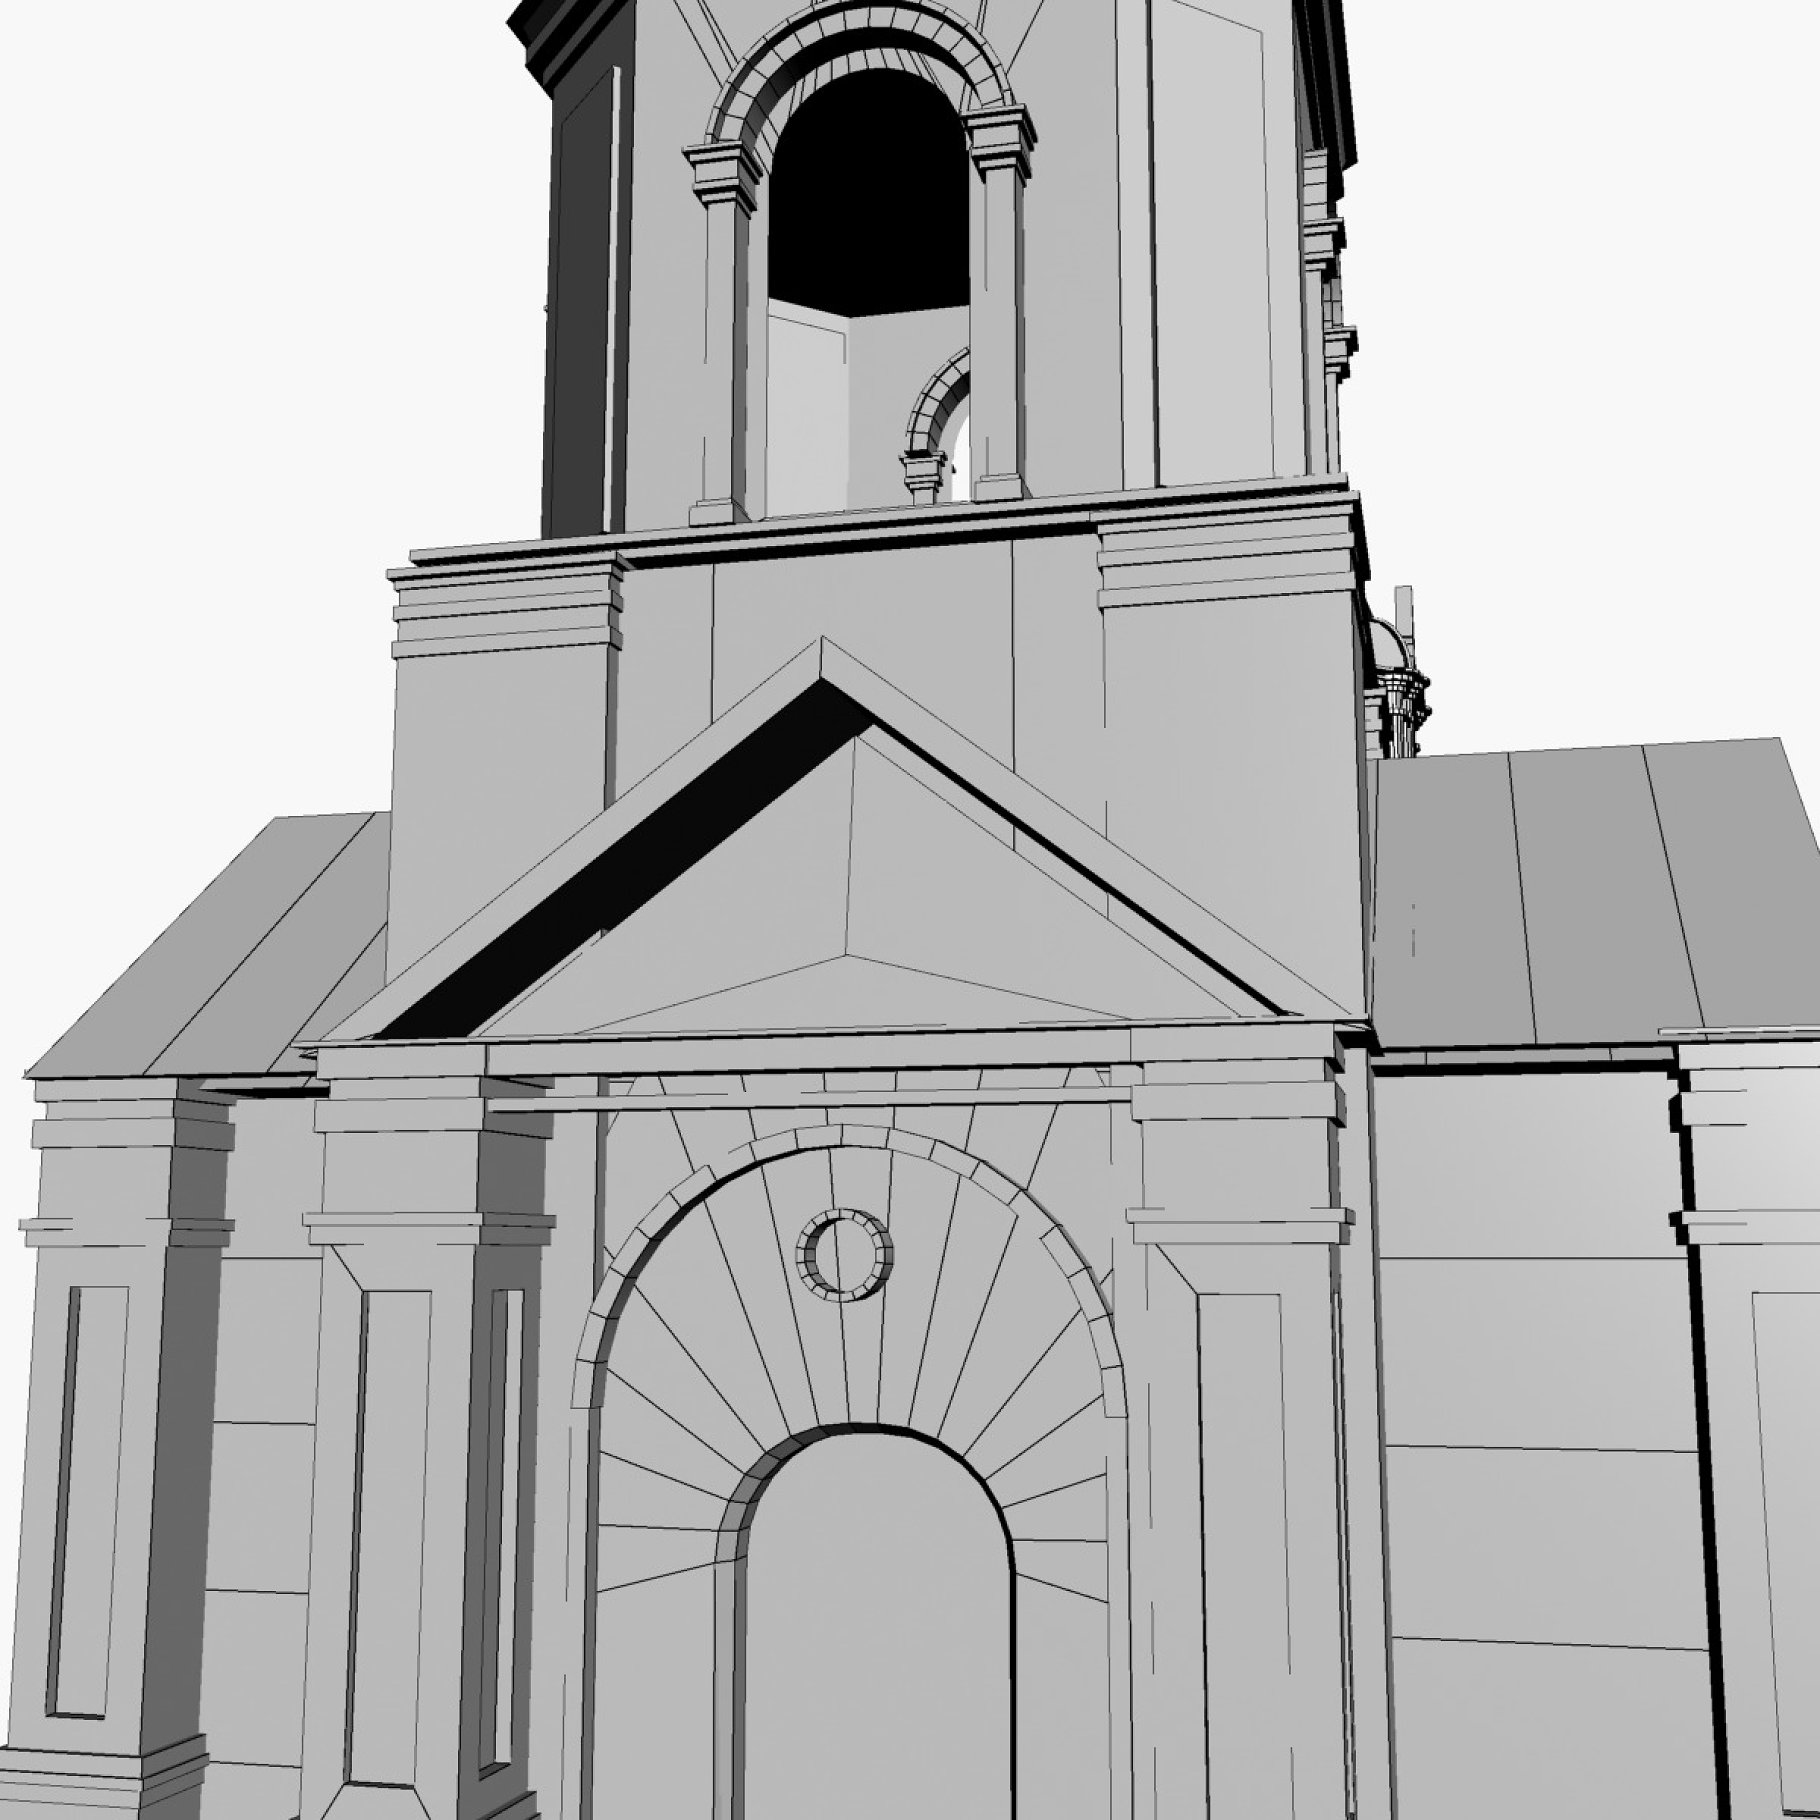 3D image of the church.